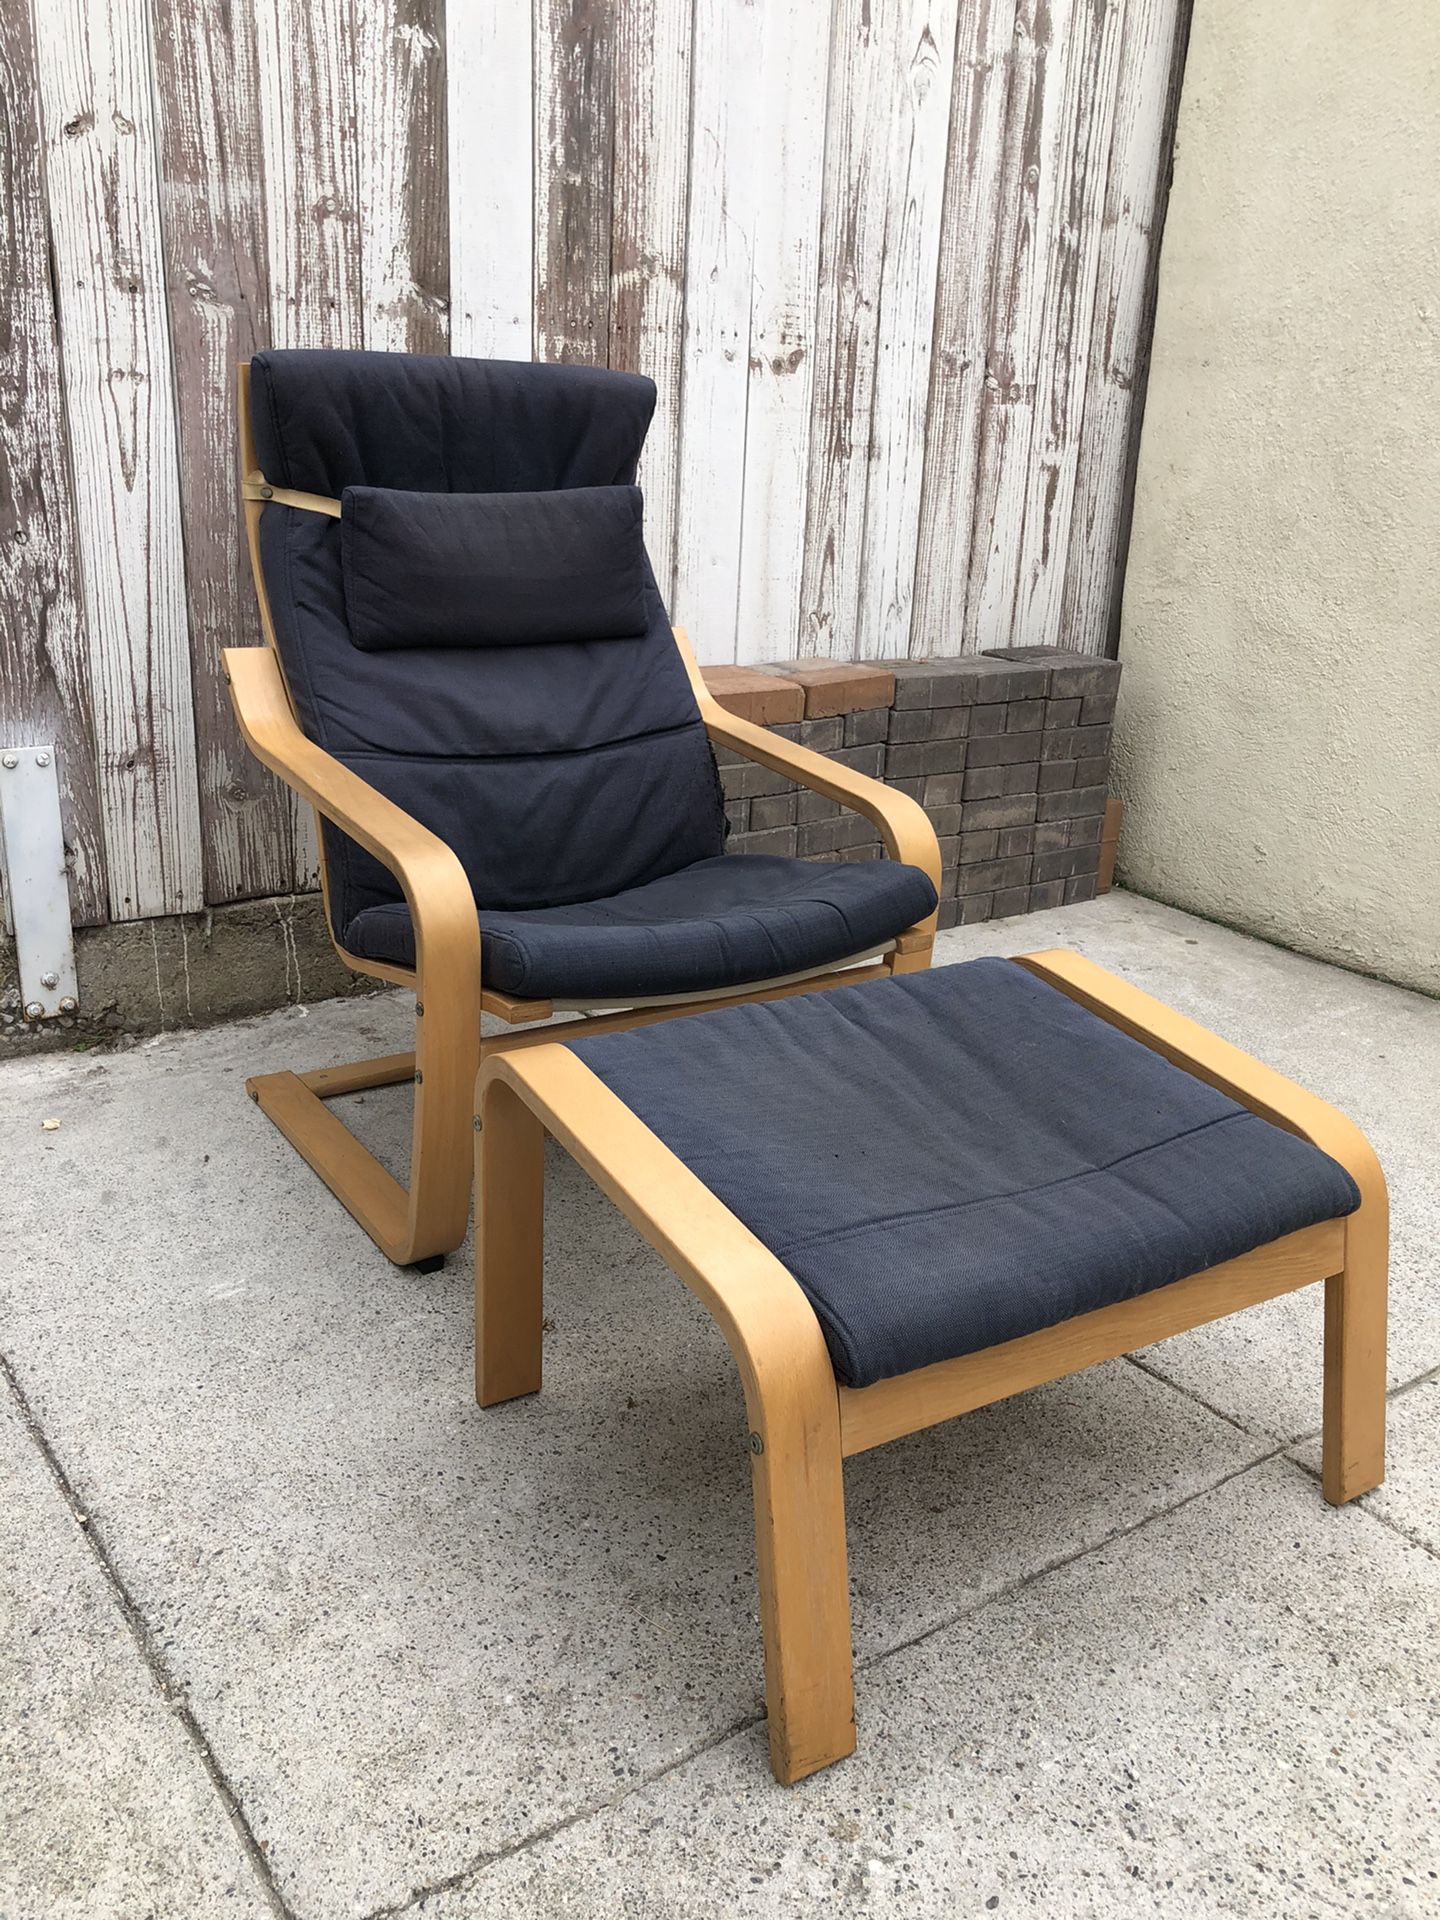 Light Birch and Navy Upholstery Lounge Chair with Ottoman